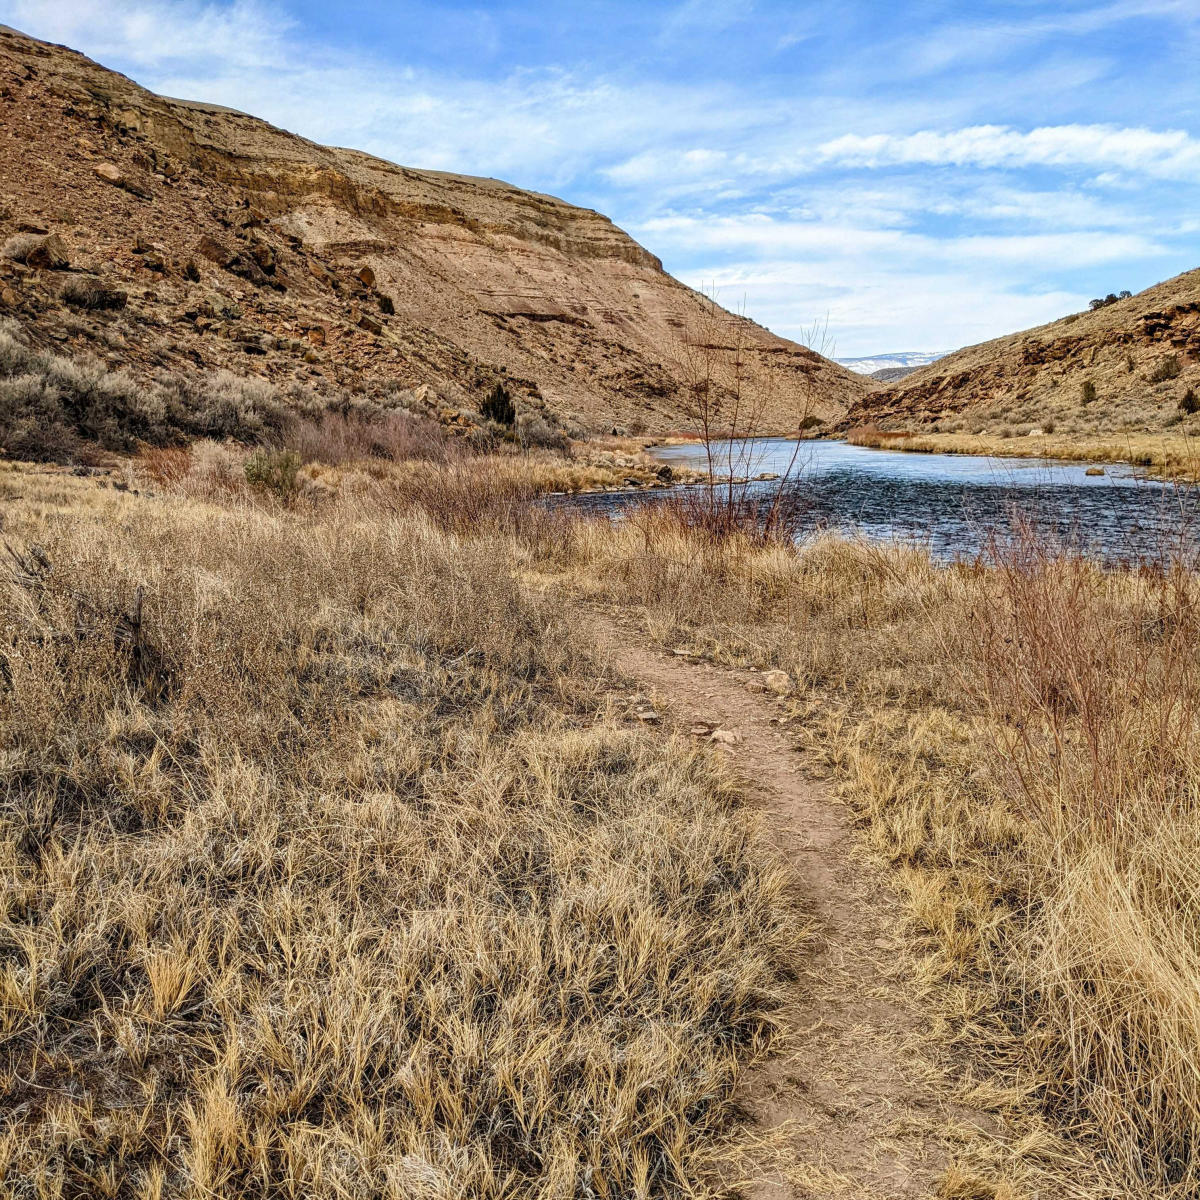 A social trail cuts through grass on the bank of the Gunnison River with canyon views and the Grand Mesa in the distance.